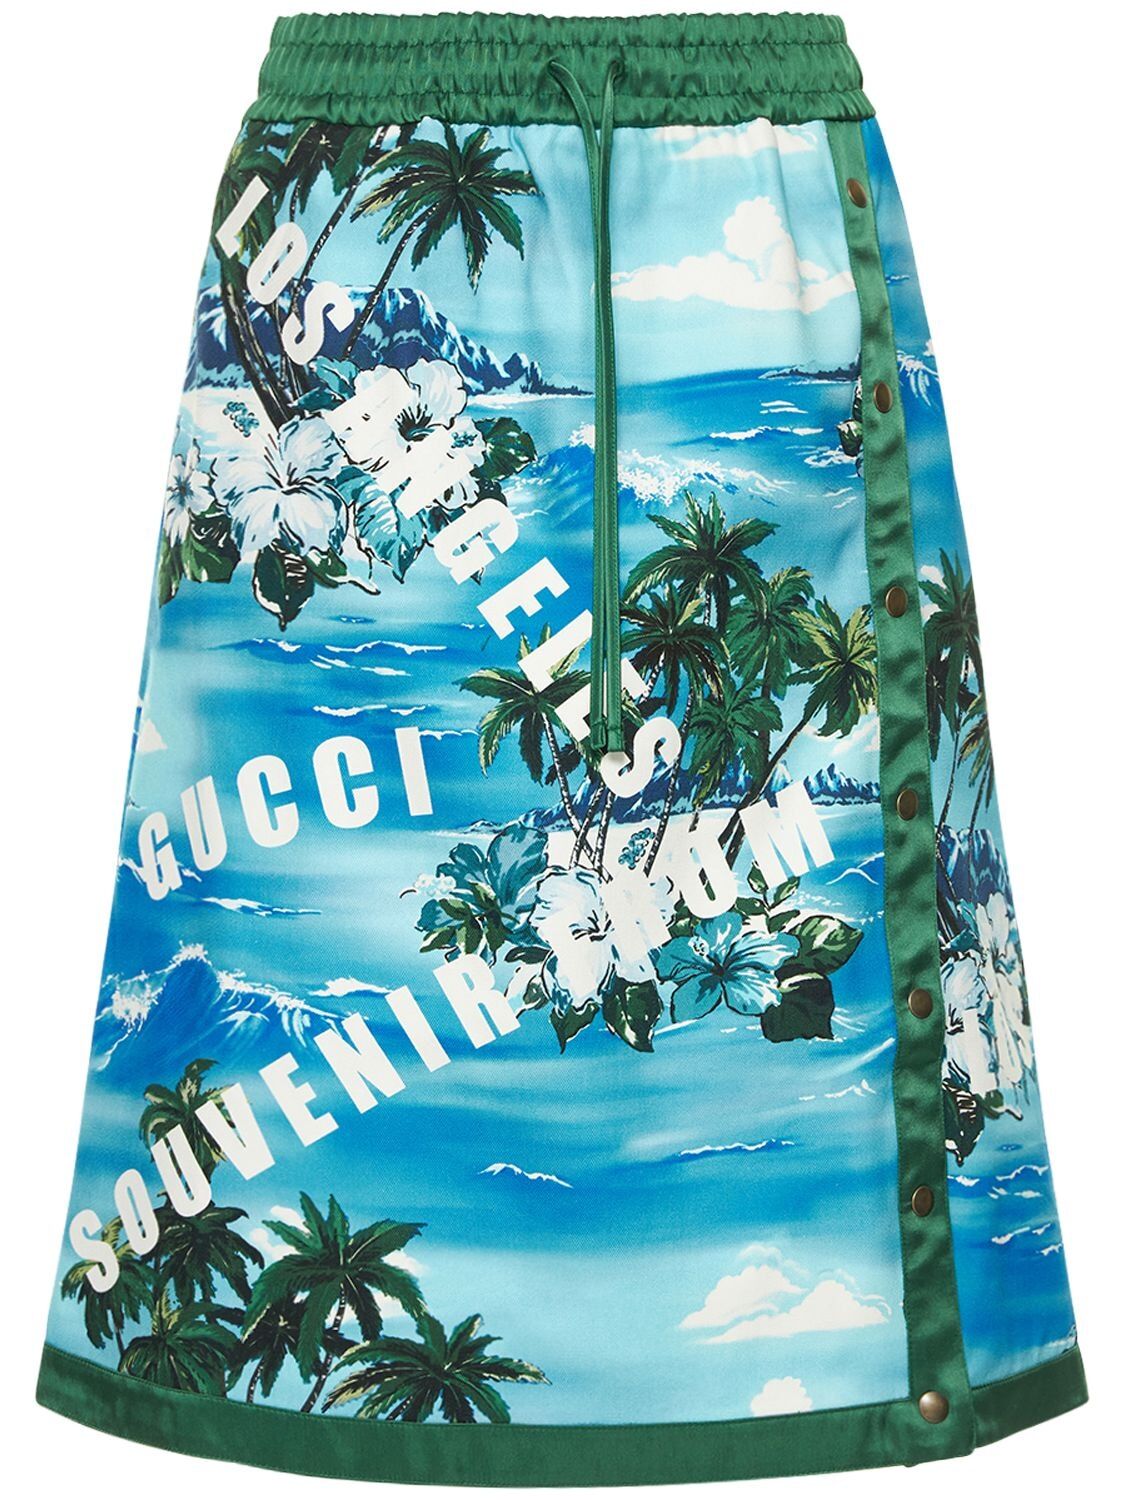 GUCCI Printed Cotton Canvas Skirt in blue / green